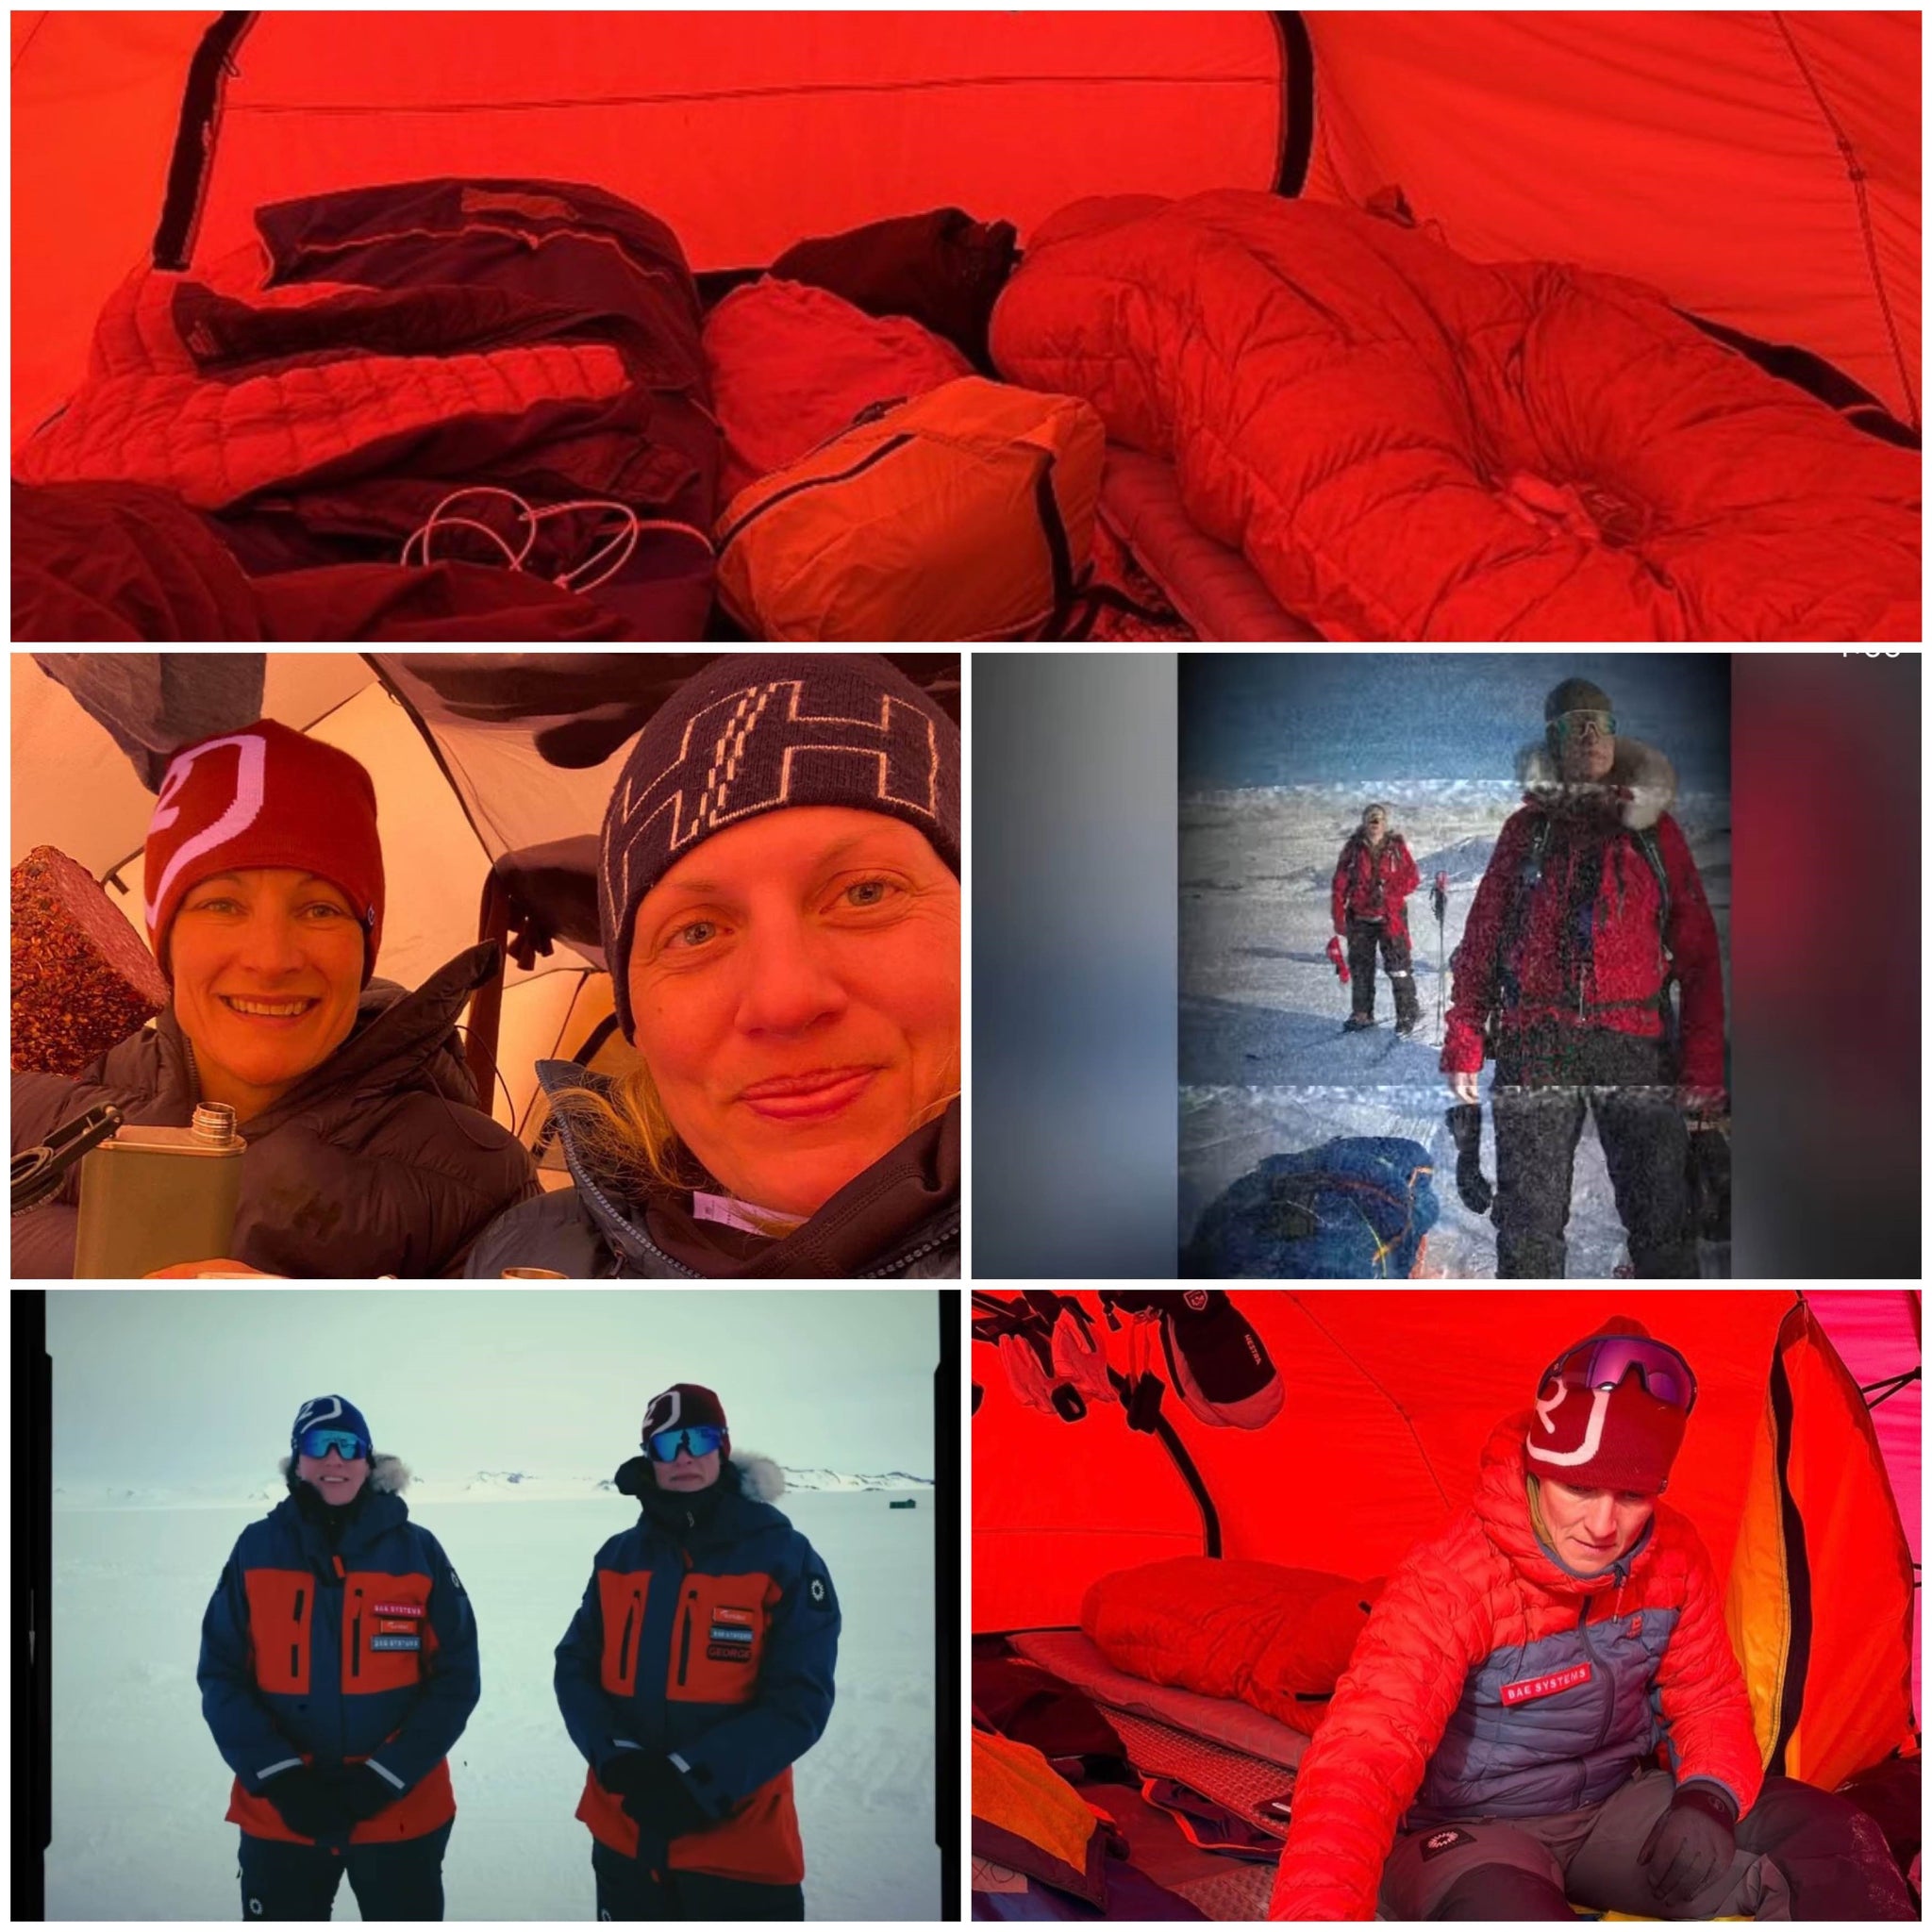 The Antartic Fire Angels, Bex and Georgie, Tent, Antartica